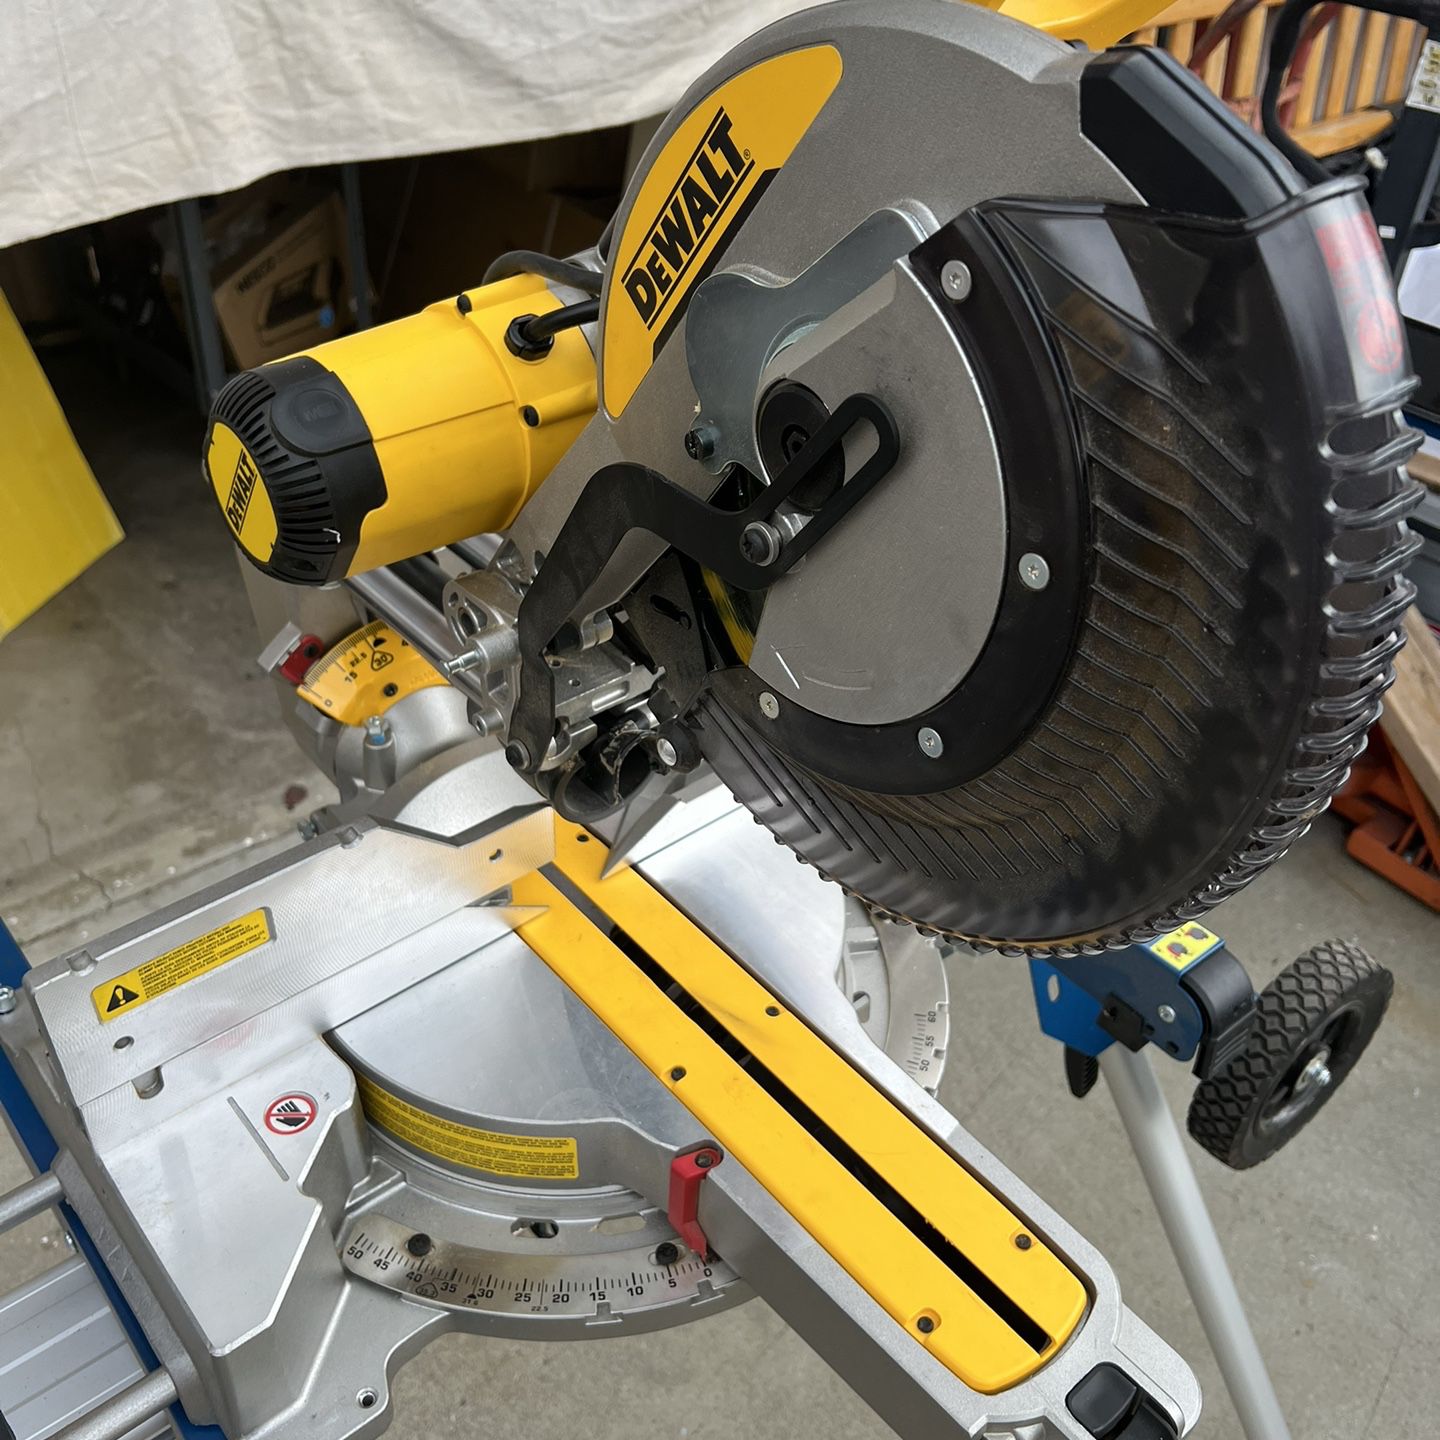 Dewall 12” Double Bevel Miter Saw